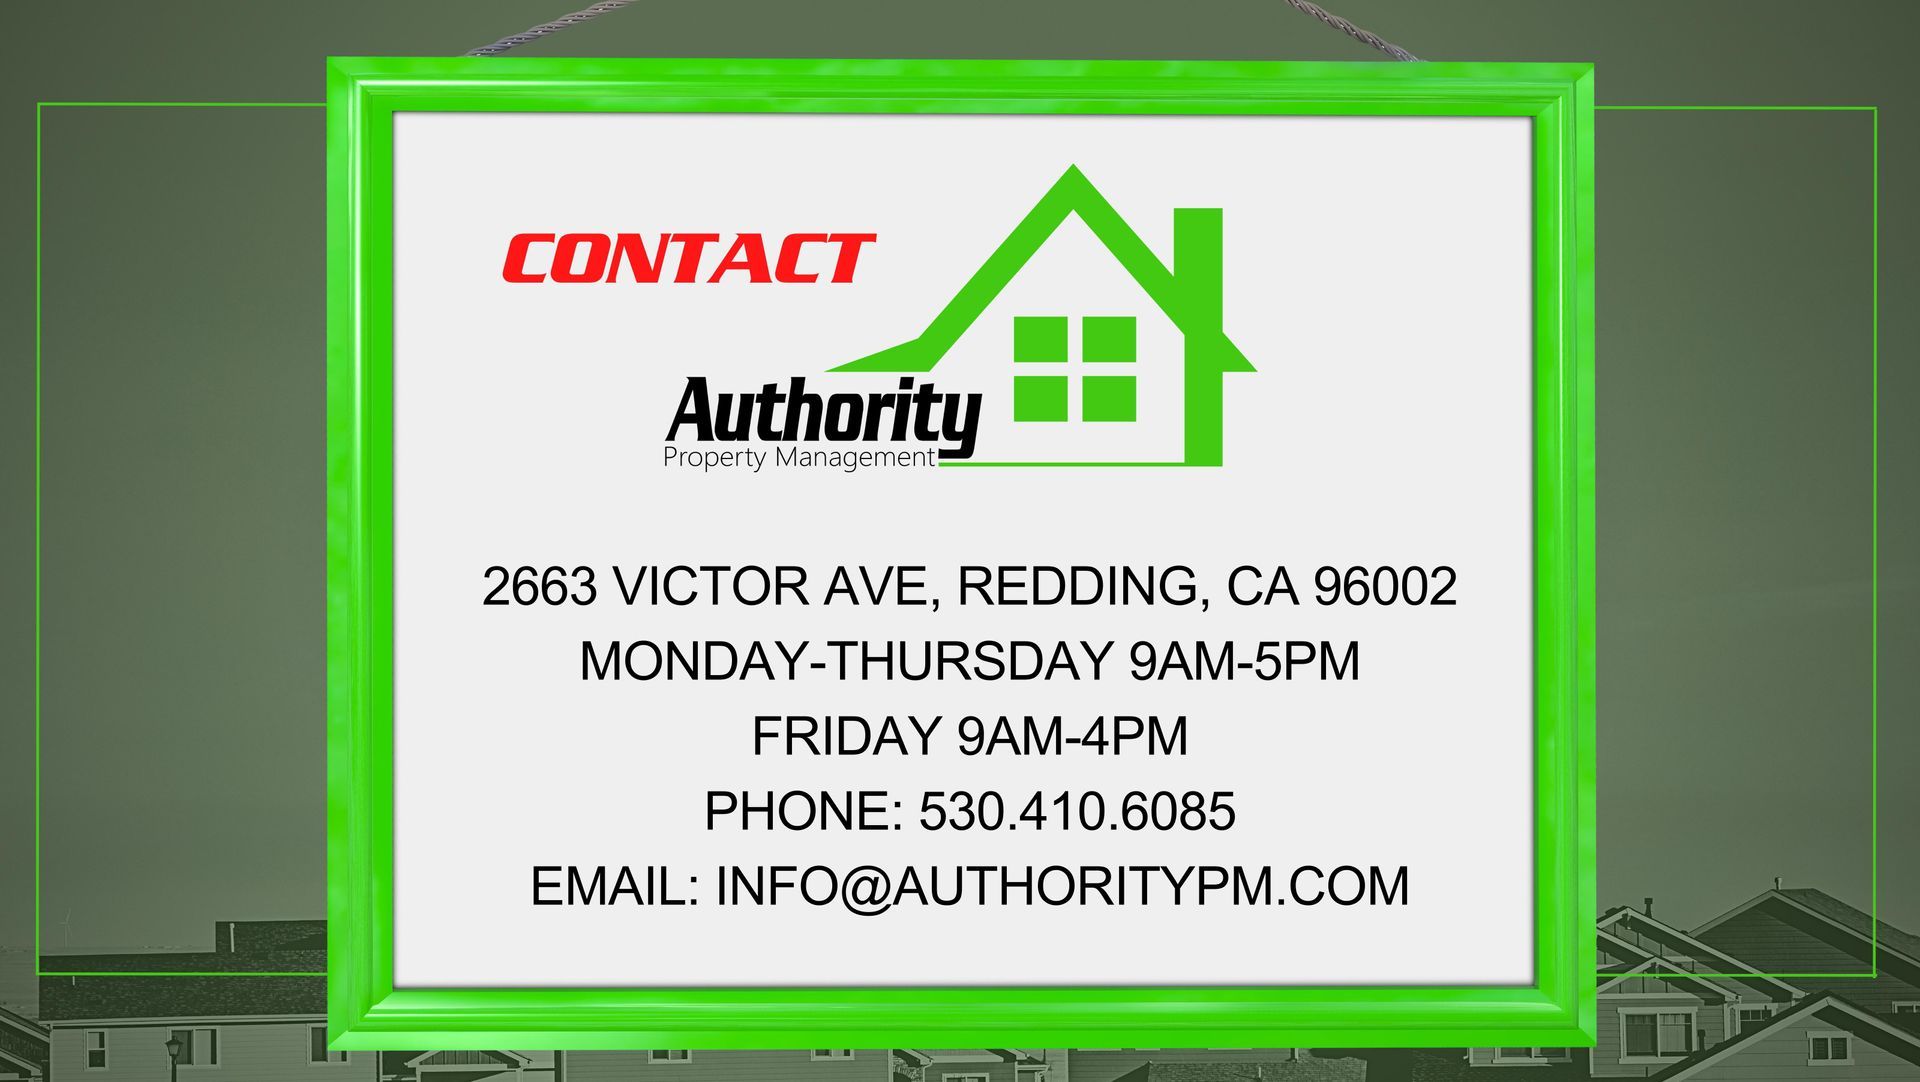 Billboard for Authority Property Management in Redding, CA, at 2663 Victor Ave. Includes house logo, contact info, and hours.